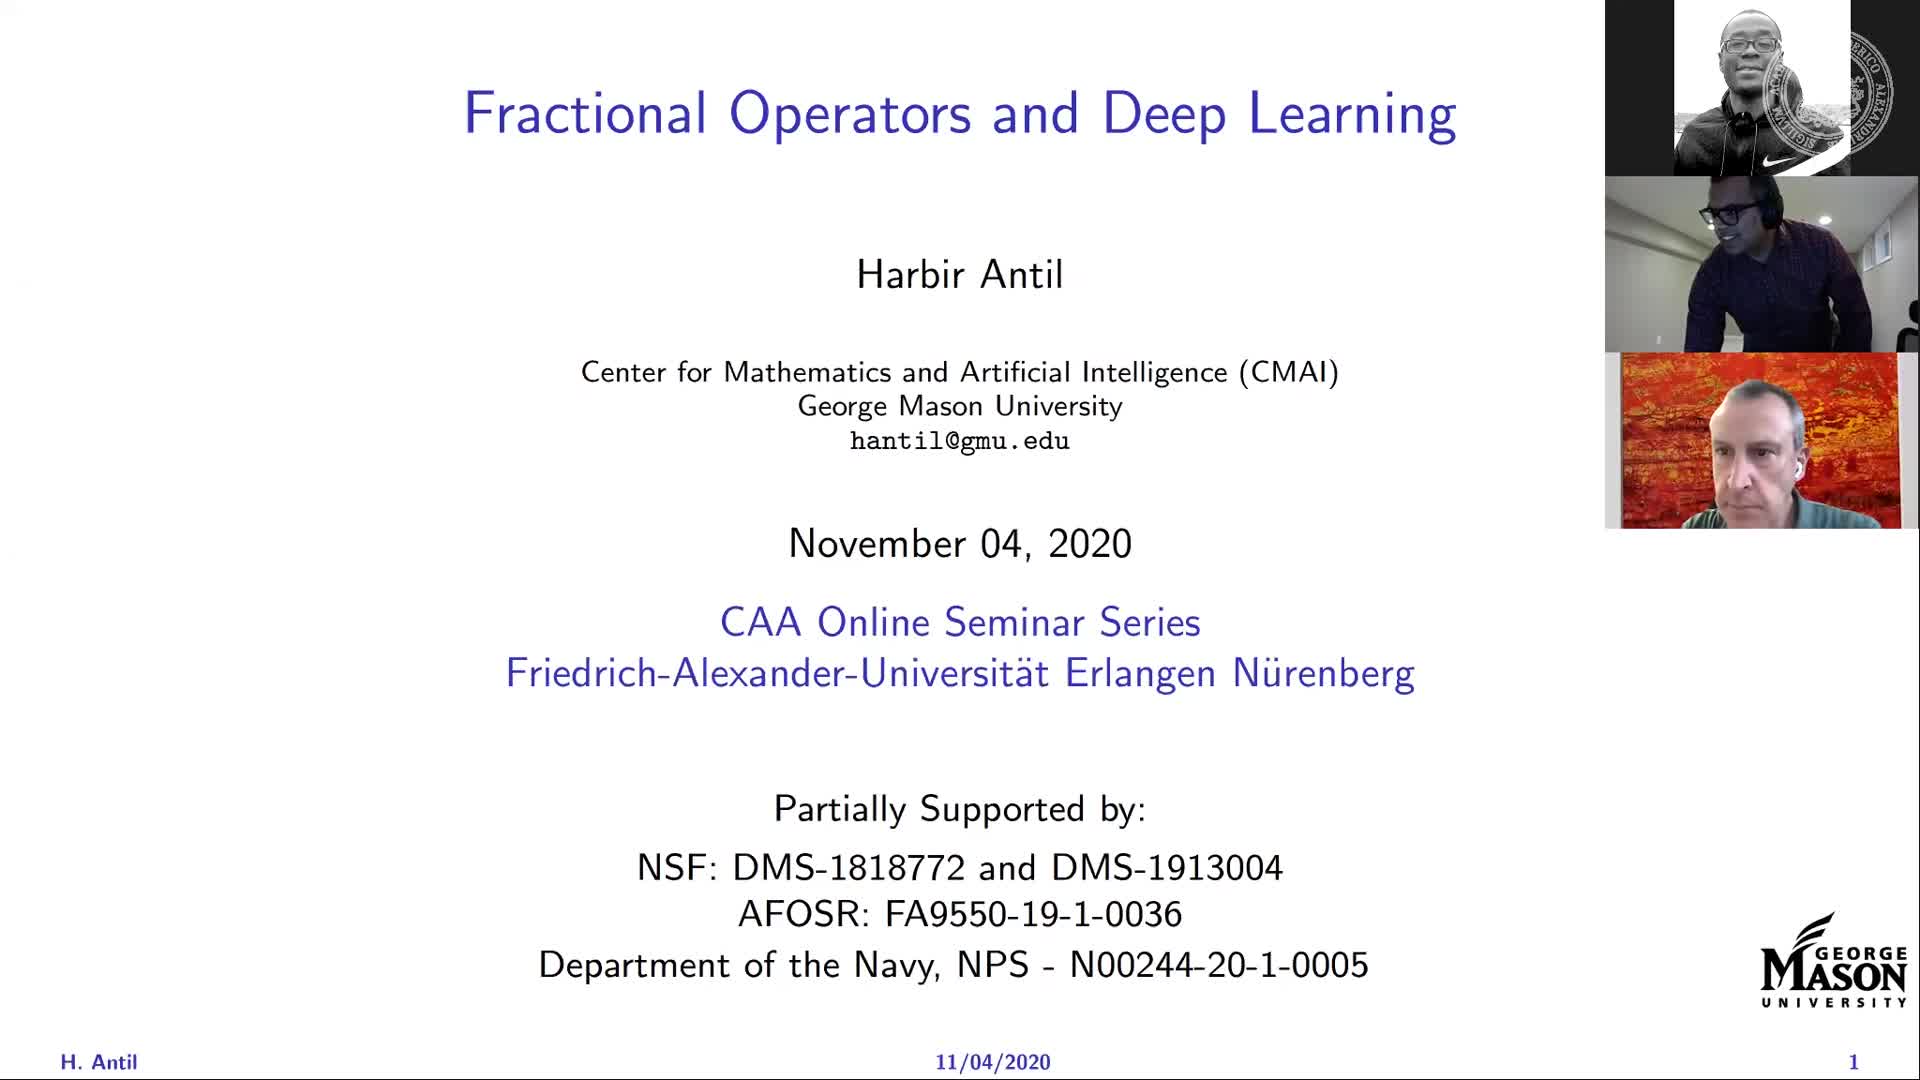 Deep Learning and Optimal Control with Fractional Operators (Harbir Antil, George Mason University) preview image